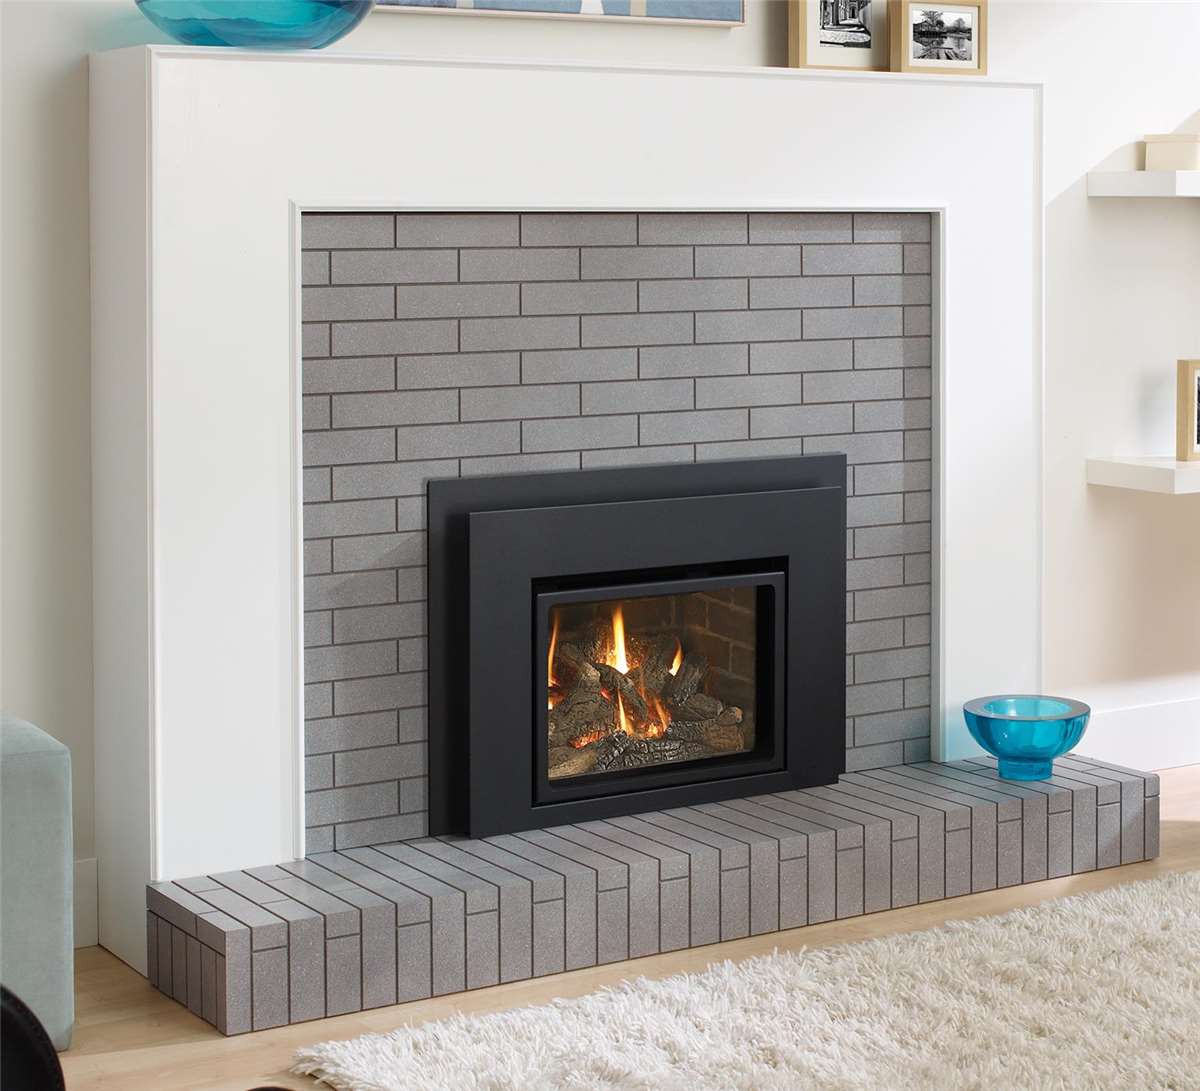 L234 with contemporary faceplate, along with optional brick panels and hearth riser.